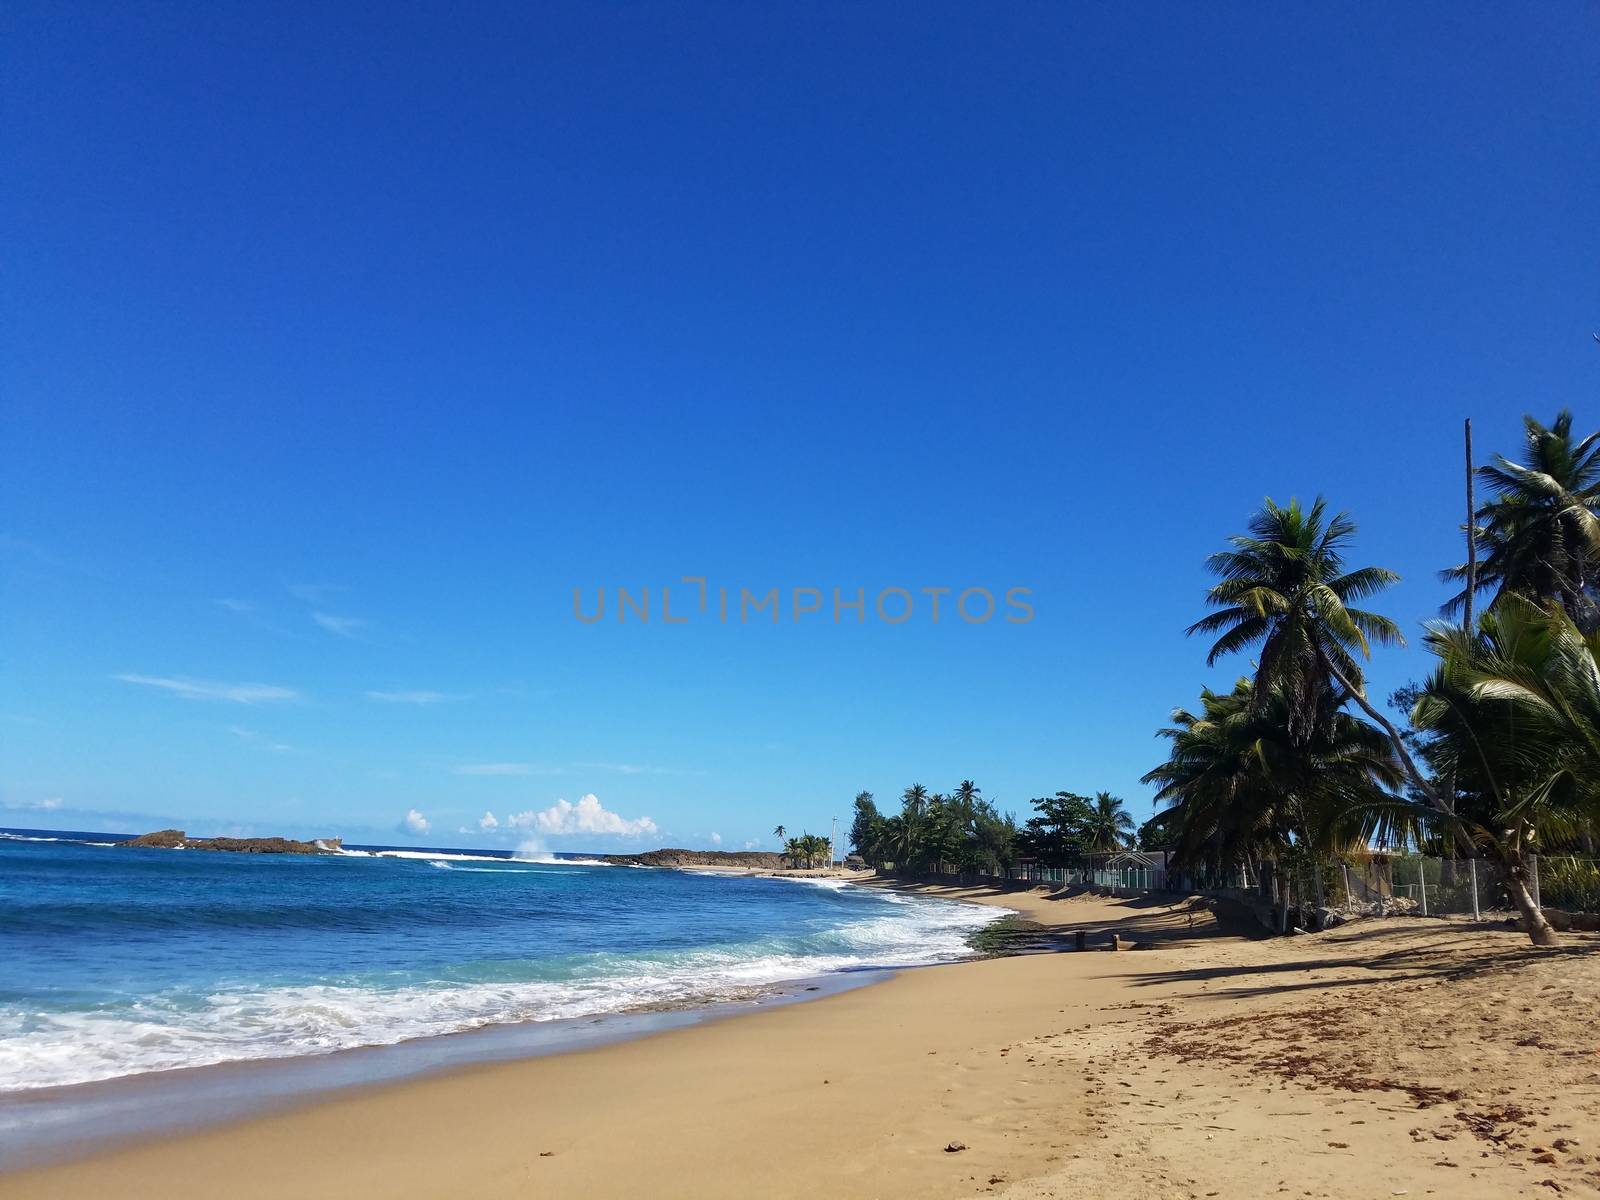 sand and ocean water on beach in Isabela, Puerto Rico by stockphotofan1